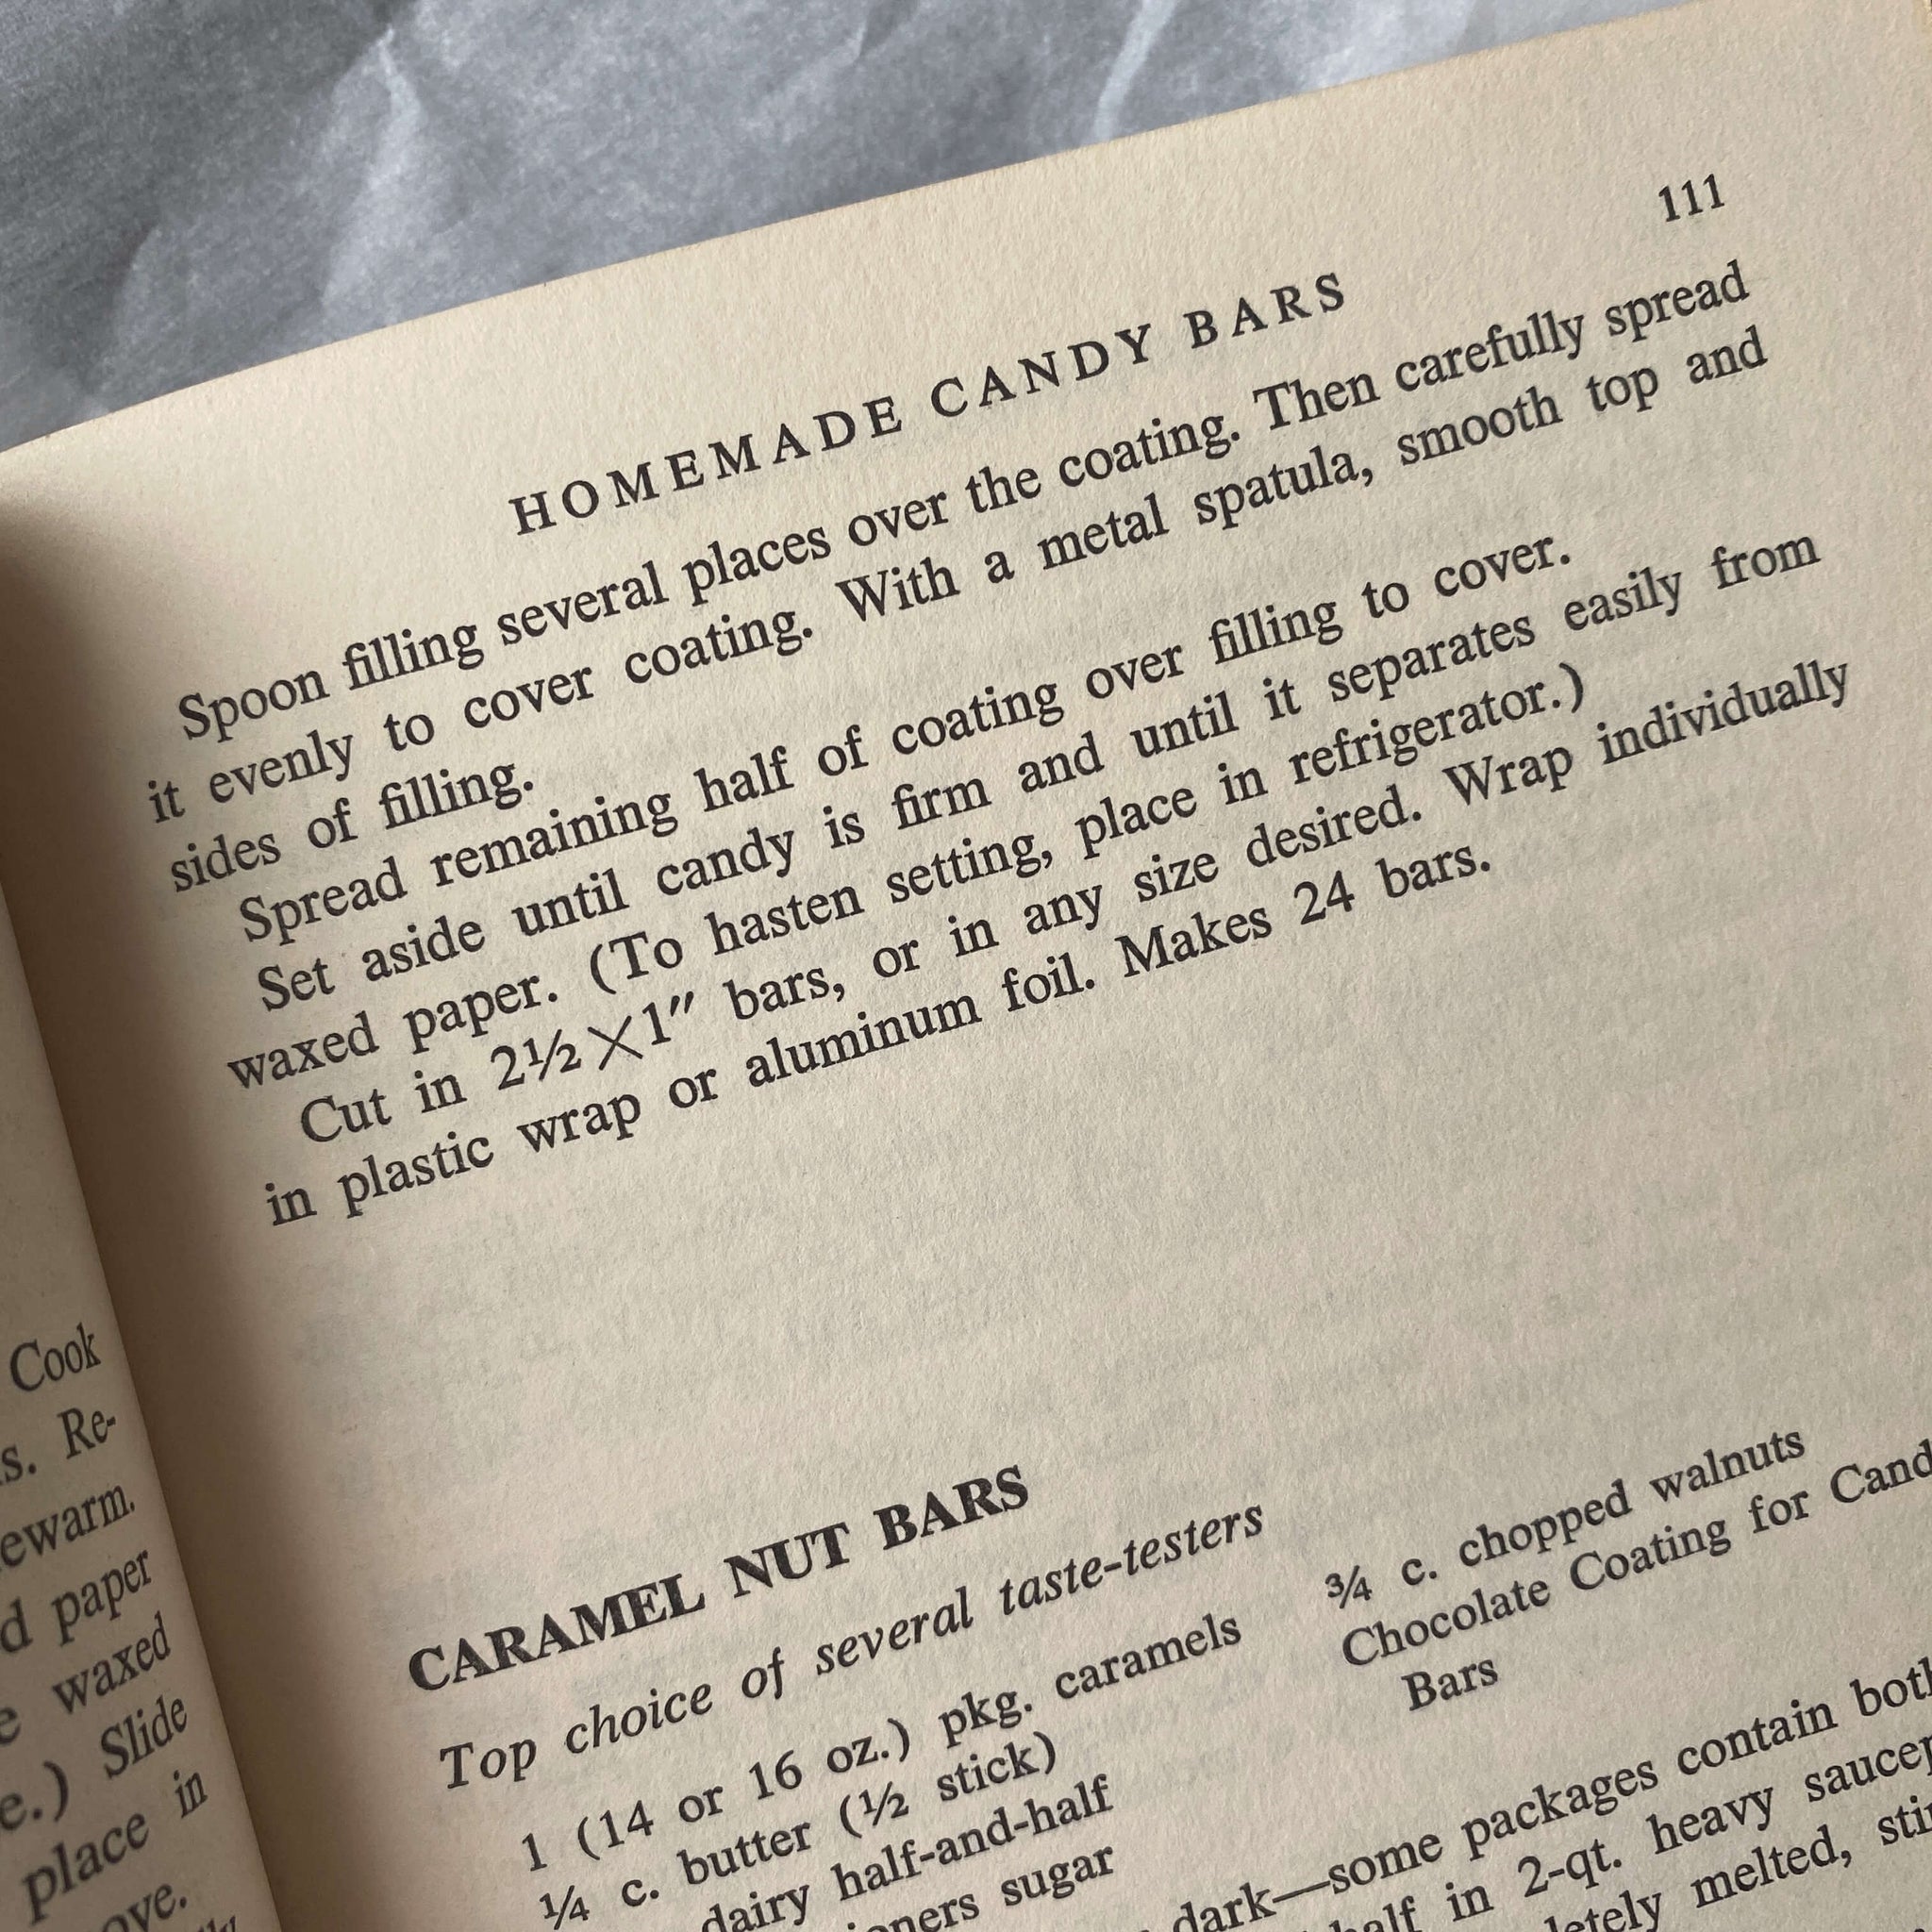 Vintage 1970s Candymaking Cookbook- Homemade Candy by  the Editors at Farm Journal